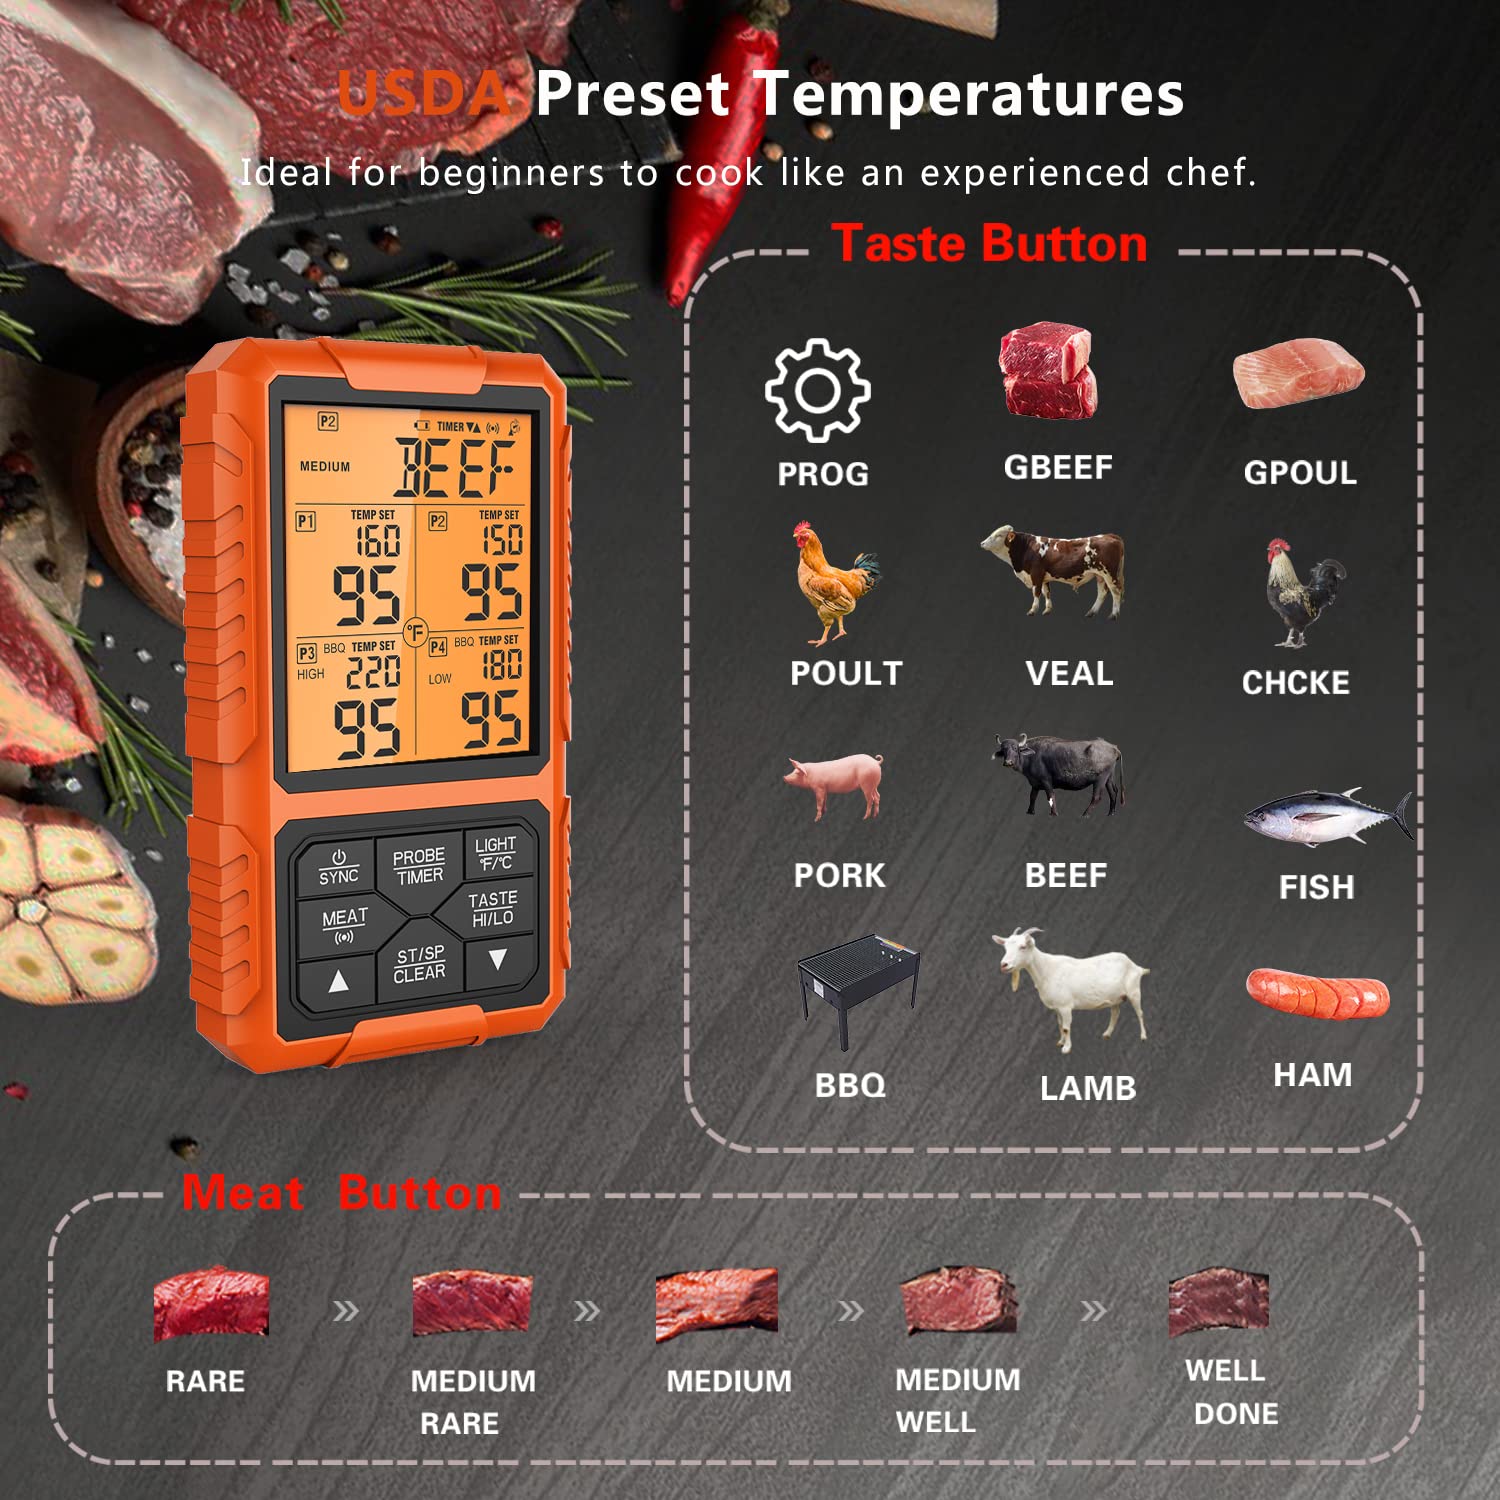 Wireless Meat Thermometer, Guichon Digital Meat Thermometer, 4 Probes Food Thermometer for BBQ, Grill, Oven, Smoker, Grill Thermometer with 500FT Remote Range